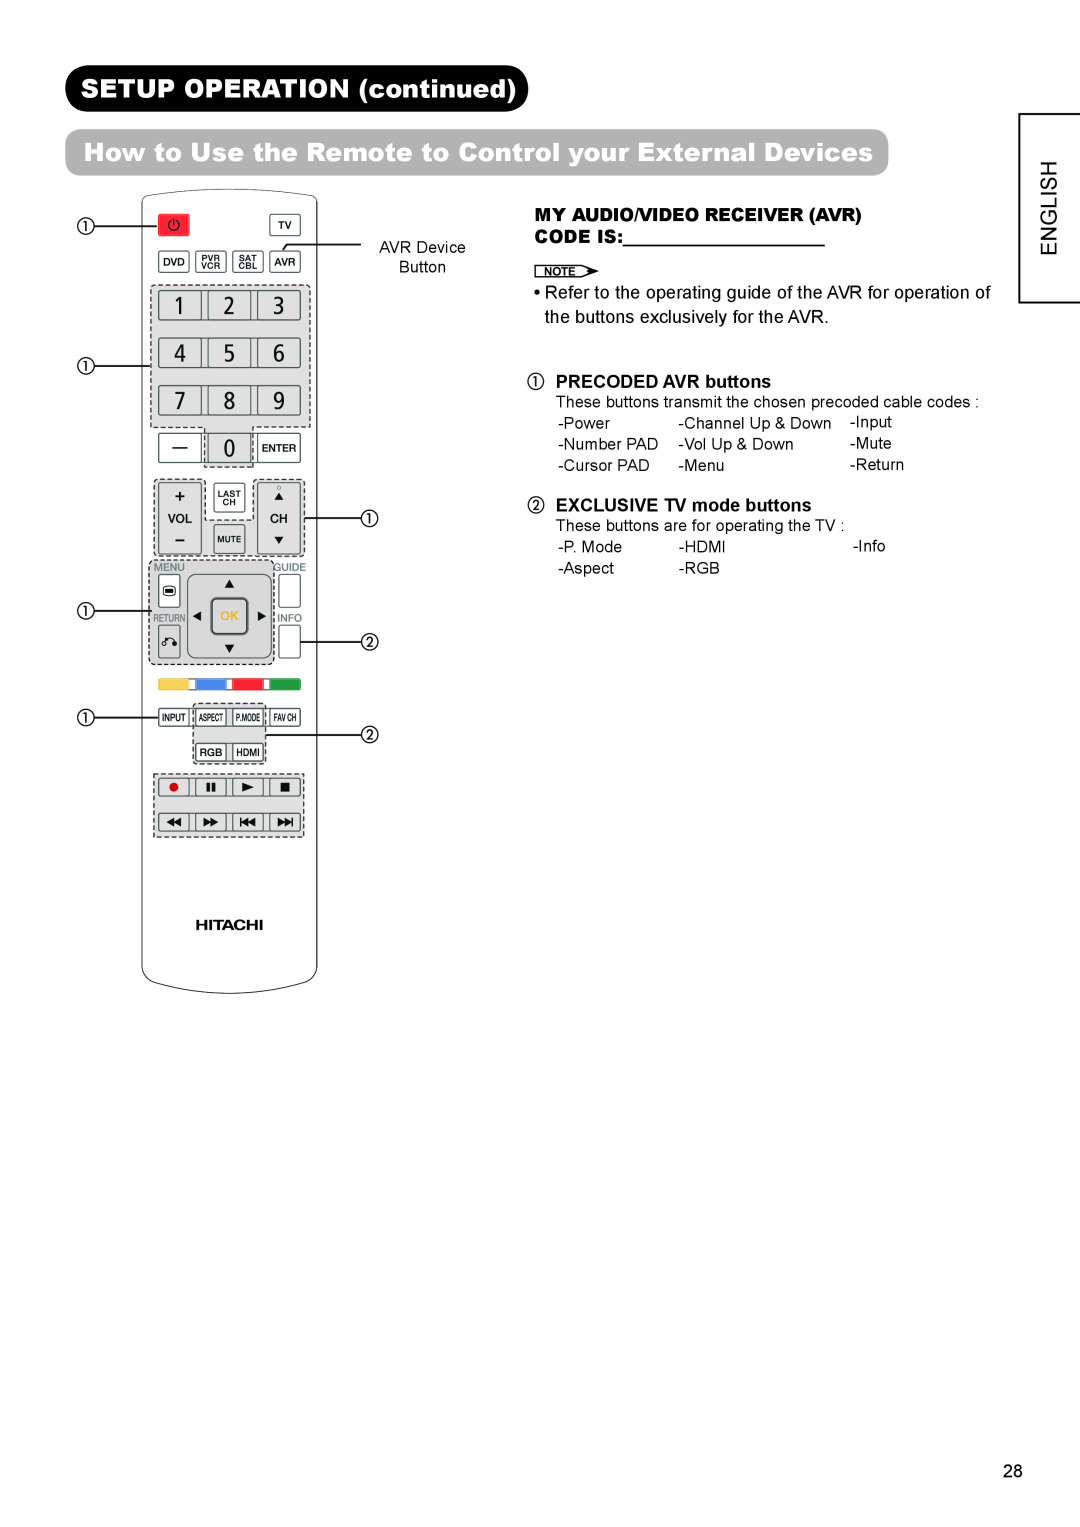 Hitachi UT32A302W manual SETUP OPERATION continued, How to Use the Remote to Control your External Devices, English, Return 